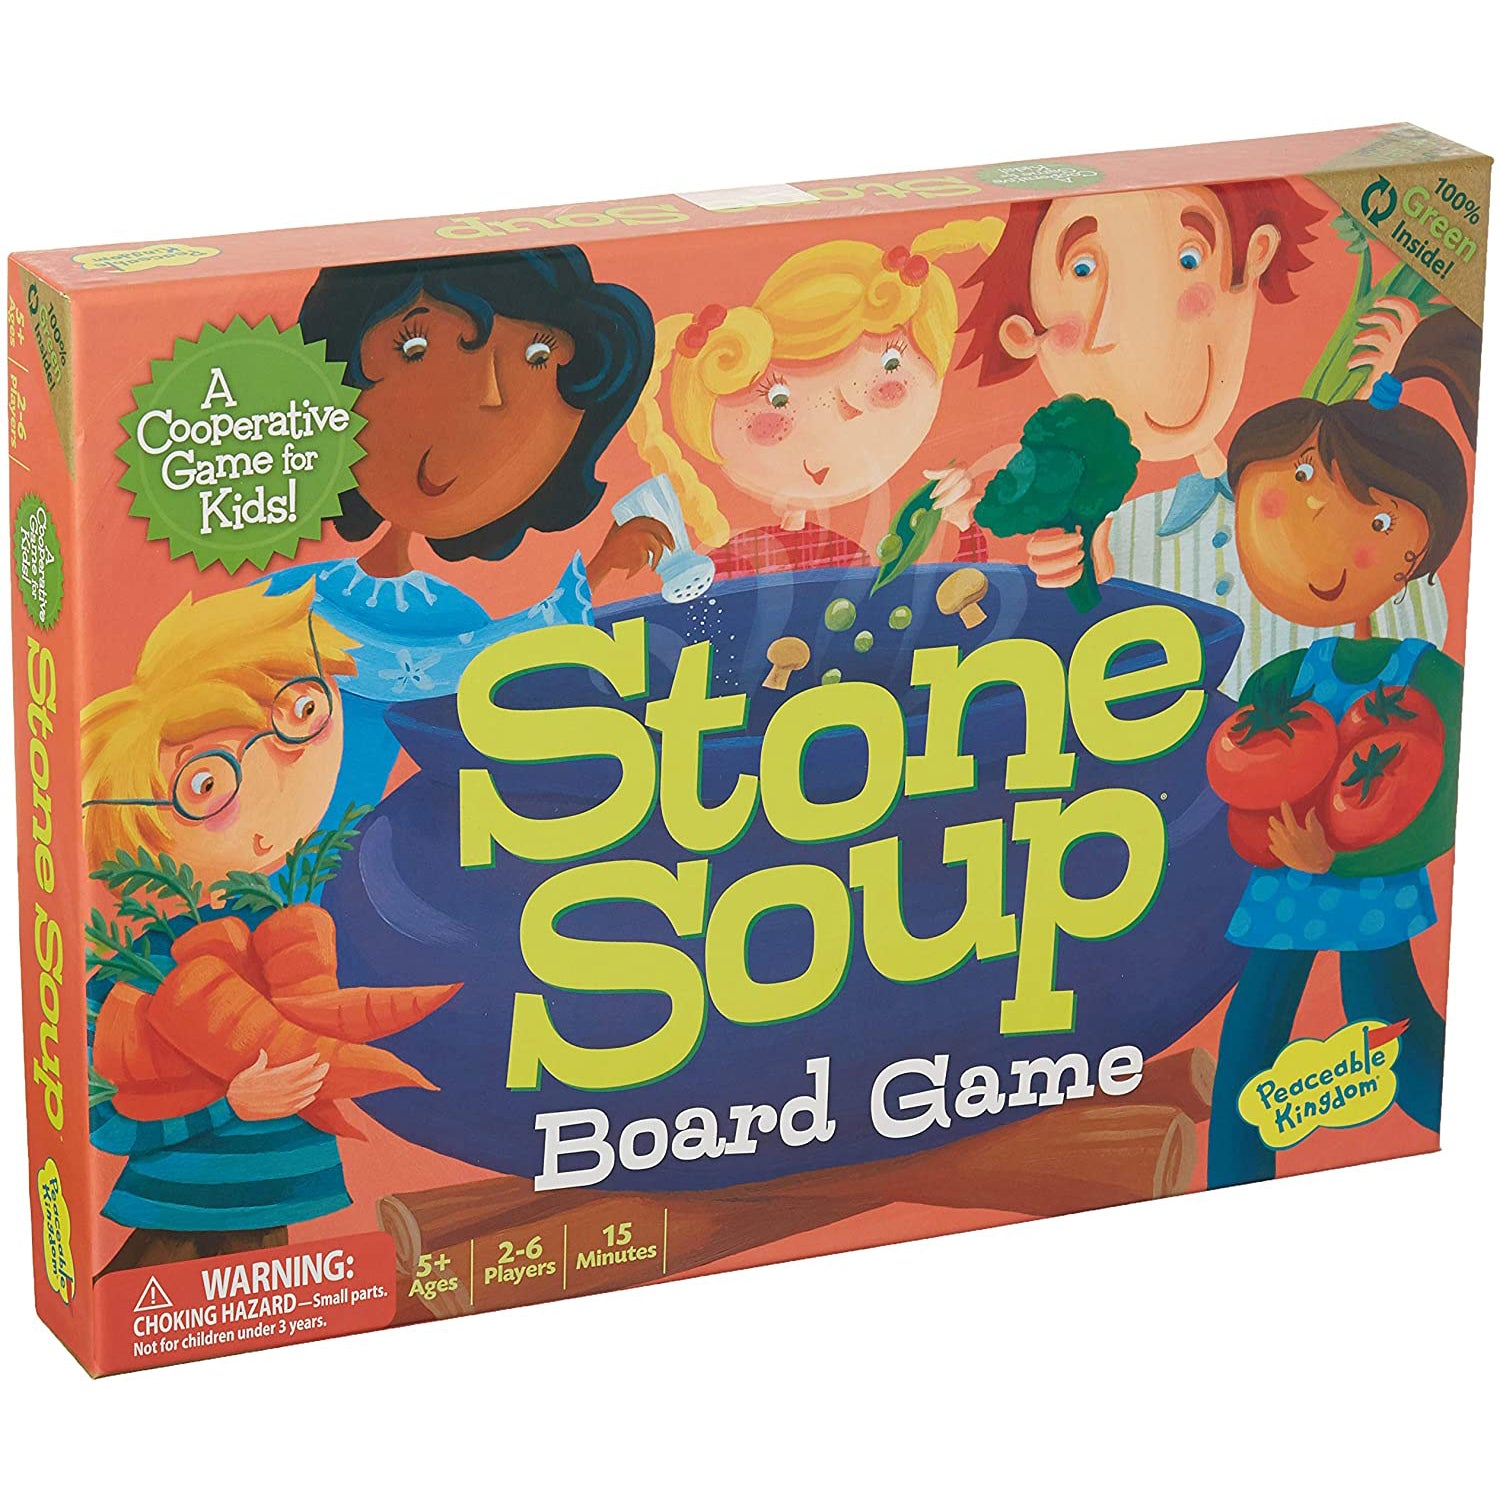 Peaceable Kingdom Stony Soup Cooperation Game